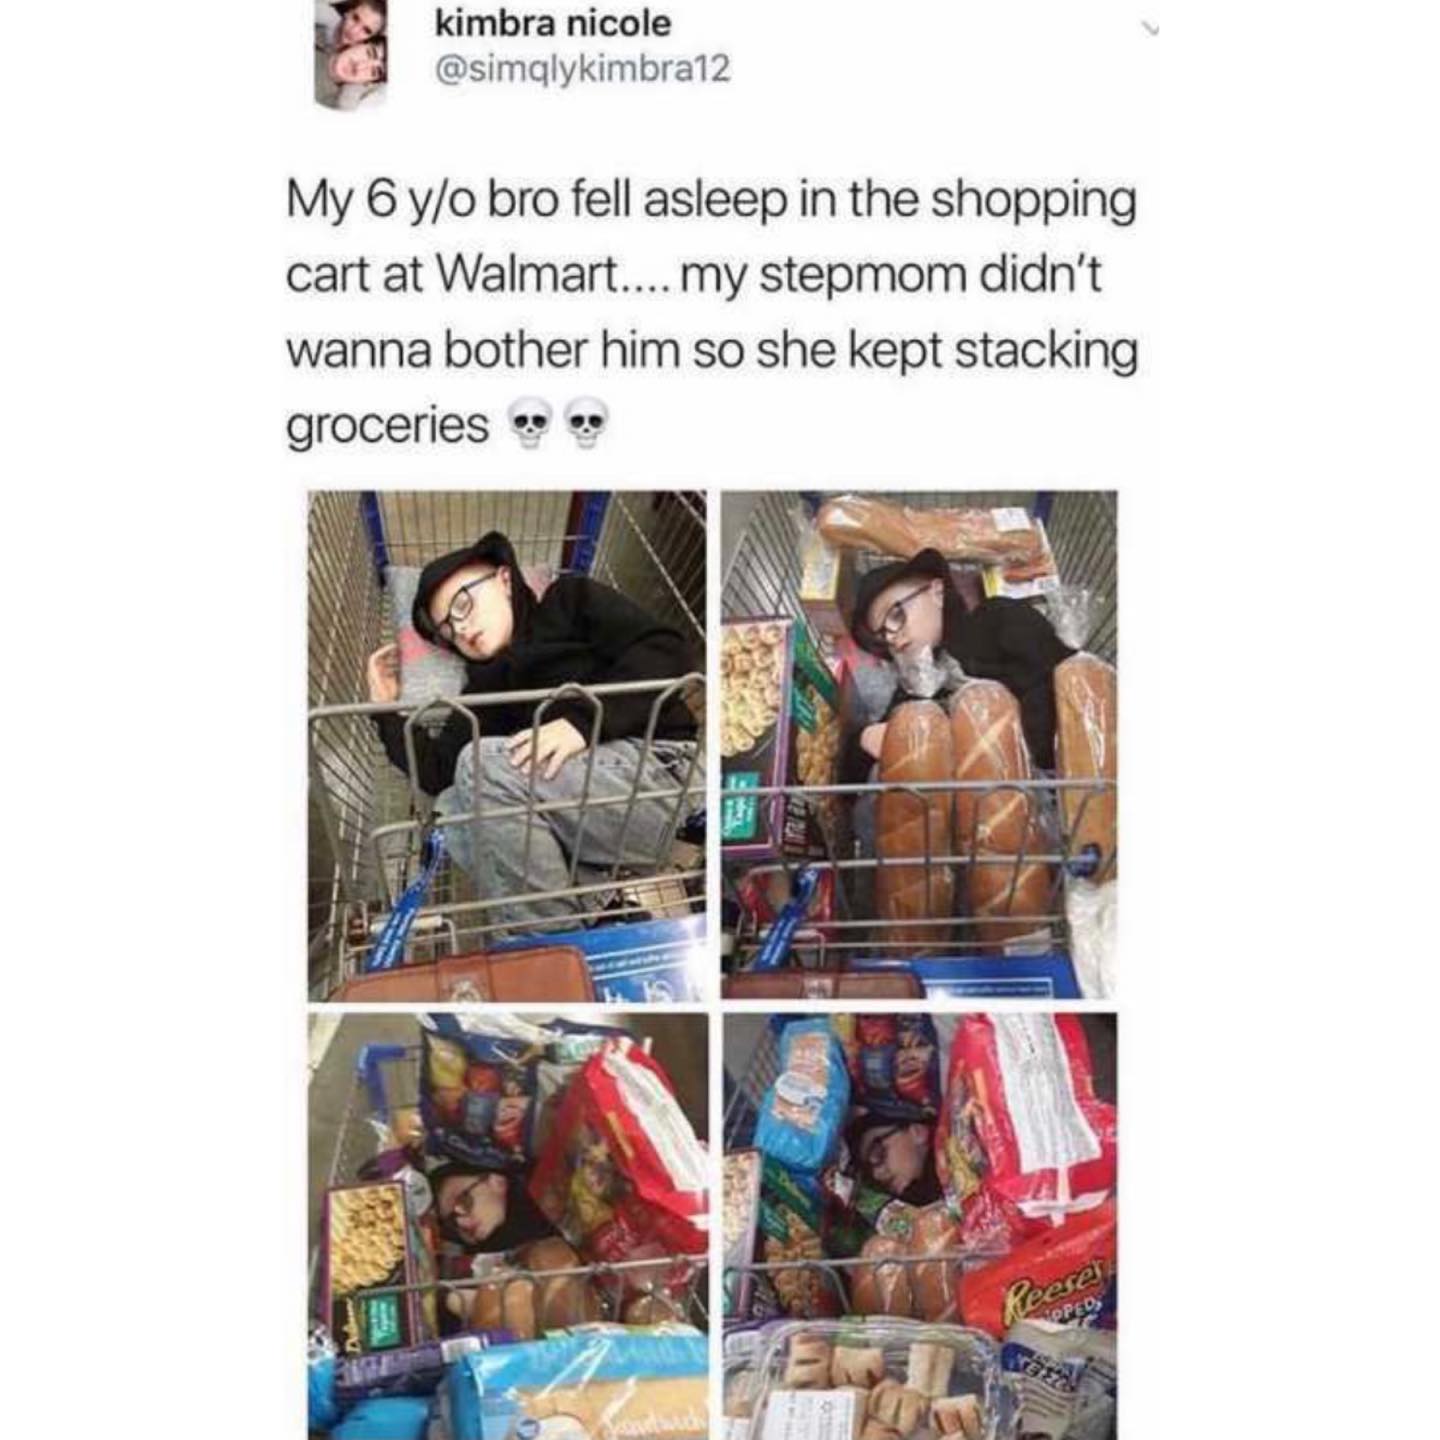 my 6 y o bro fell asleep - kimbra nicole My 6 yo bro fell asleep in the shopping cart at Walmart.... my stepmom didn't wanna bother him so she kept stacking groceries Reeses Oped See